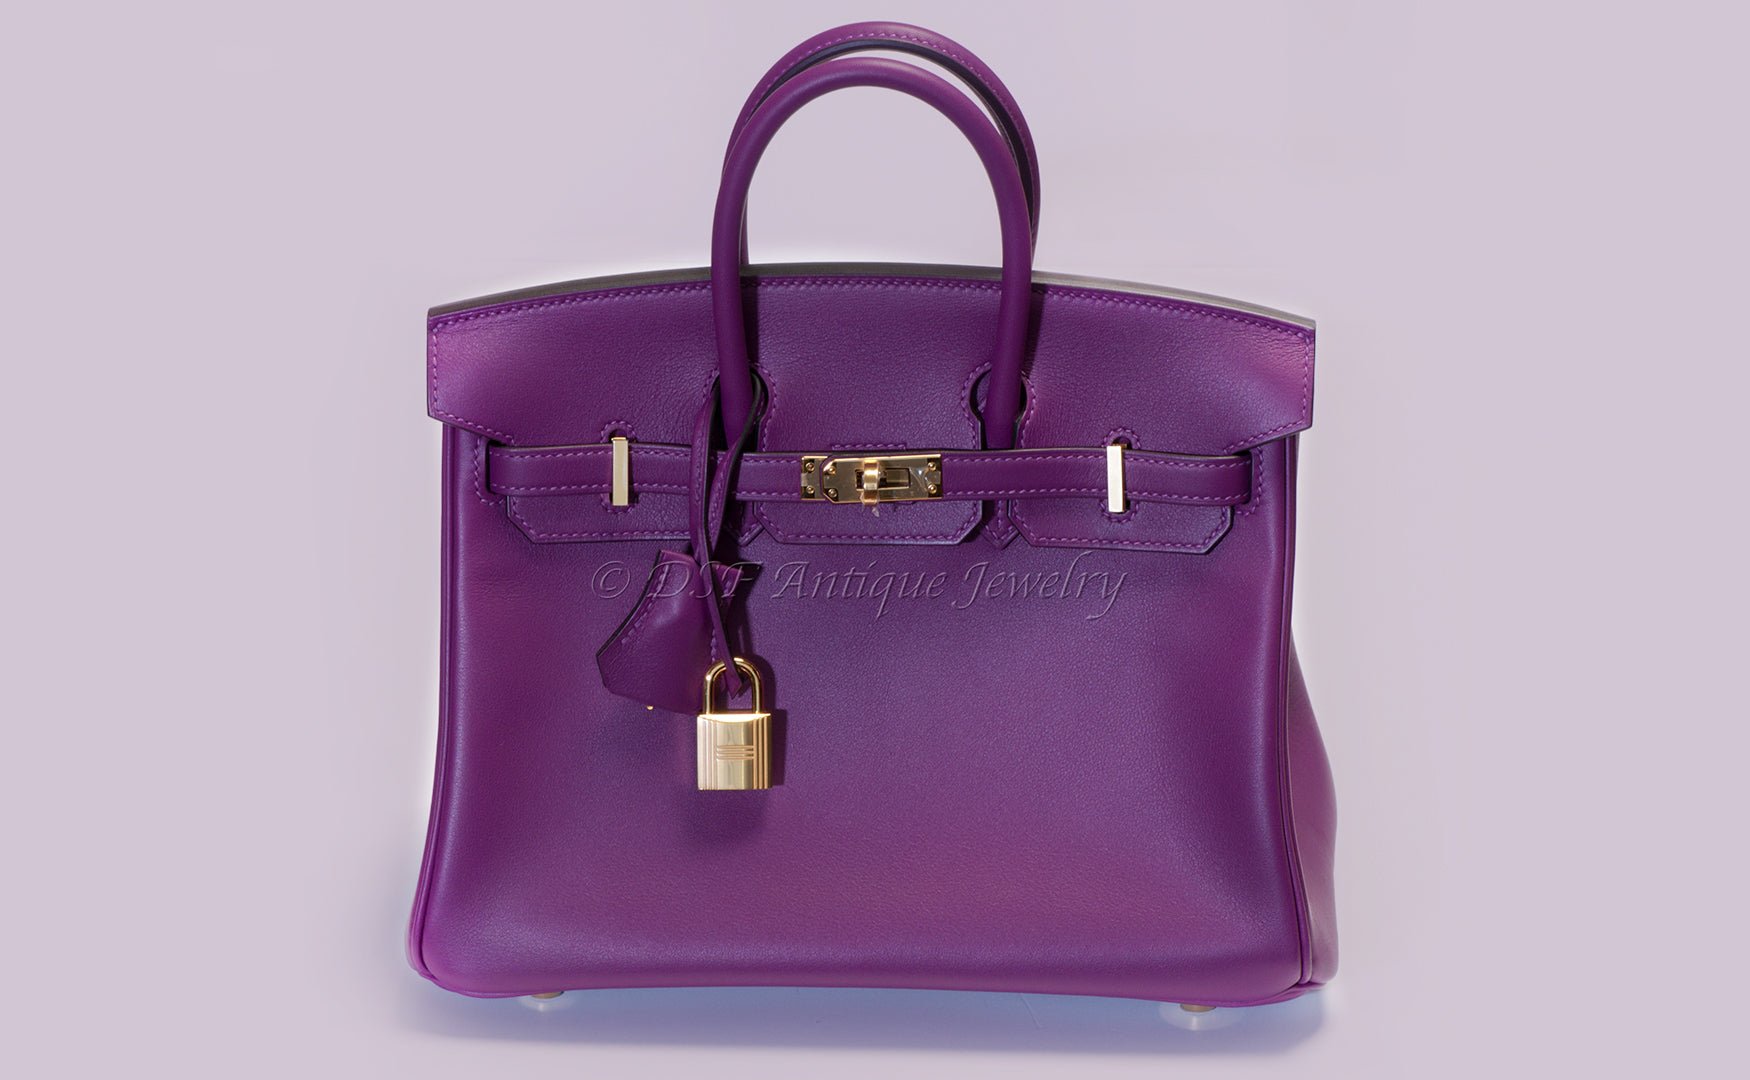 Birkin Bags - One of The Most Expensive Luxury - DSF Antique Jewelry